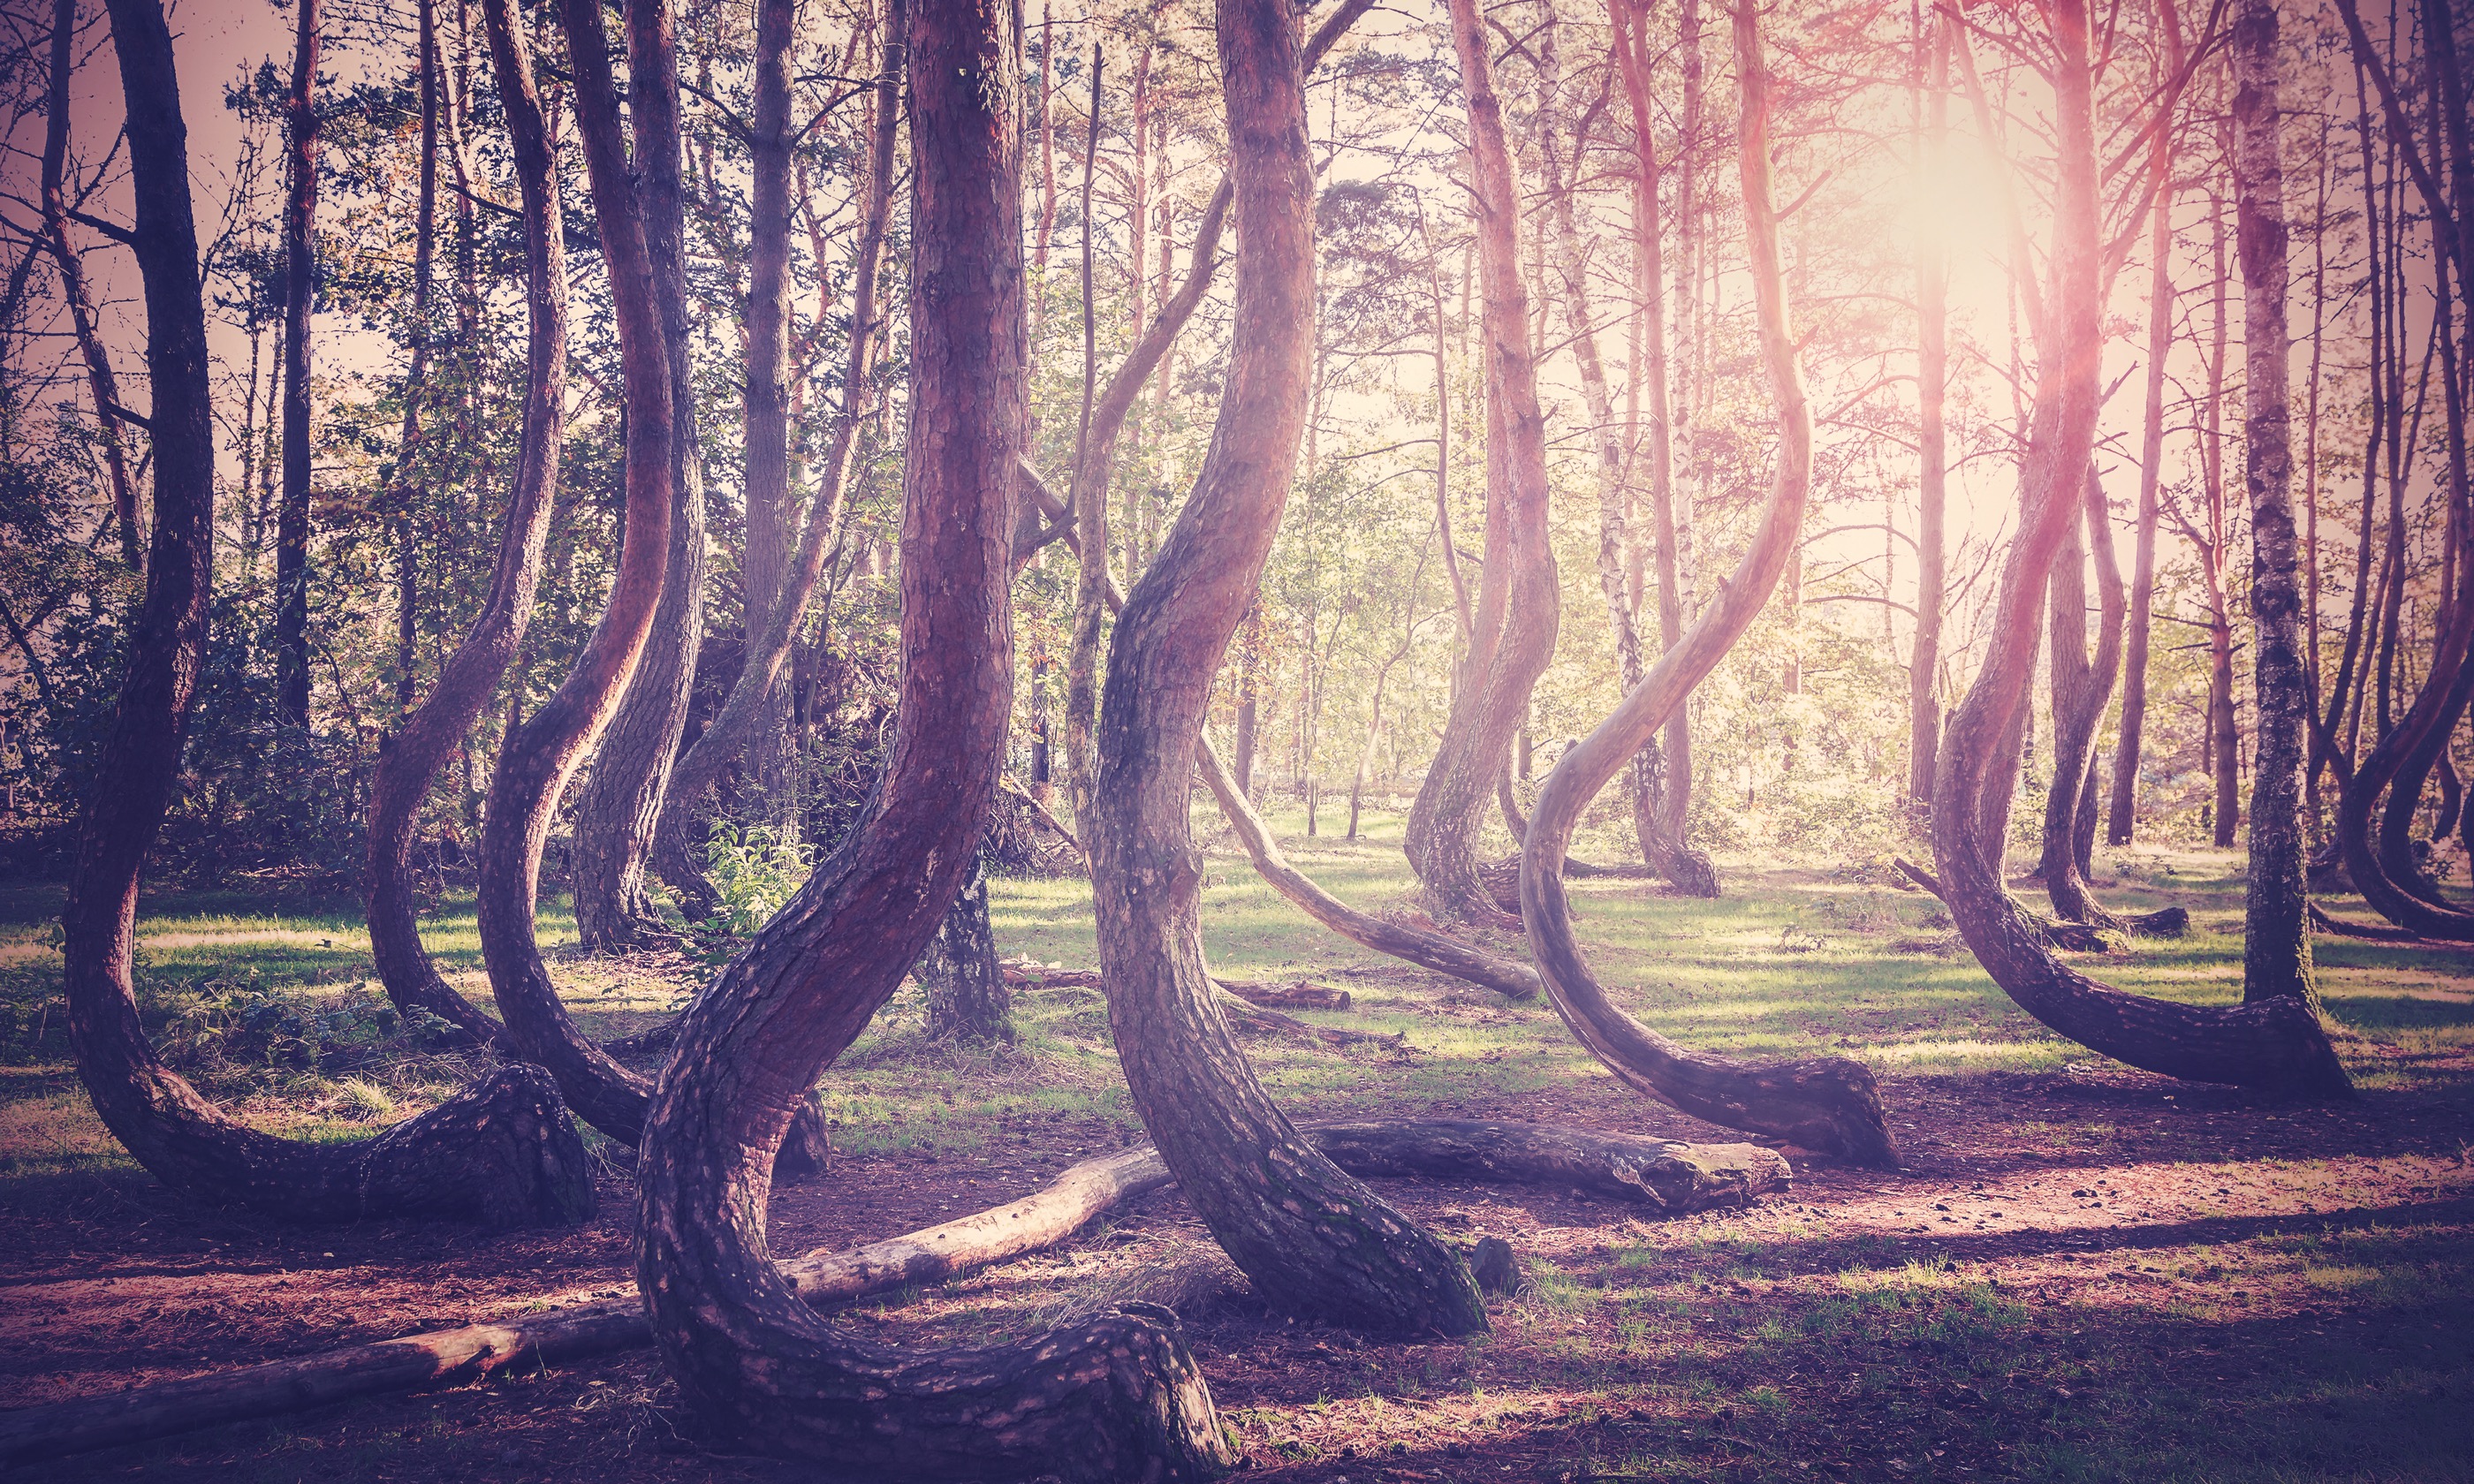 Crooked Forest, Poland (Shutterstock.com)